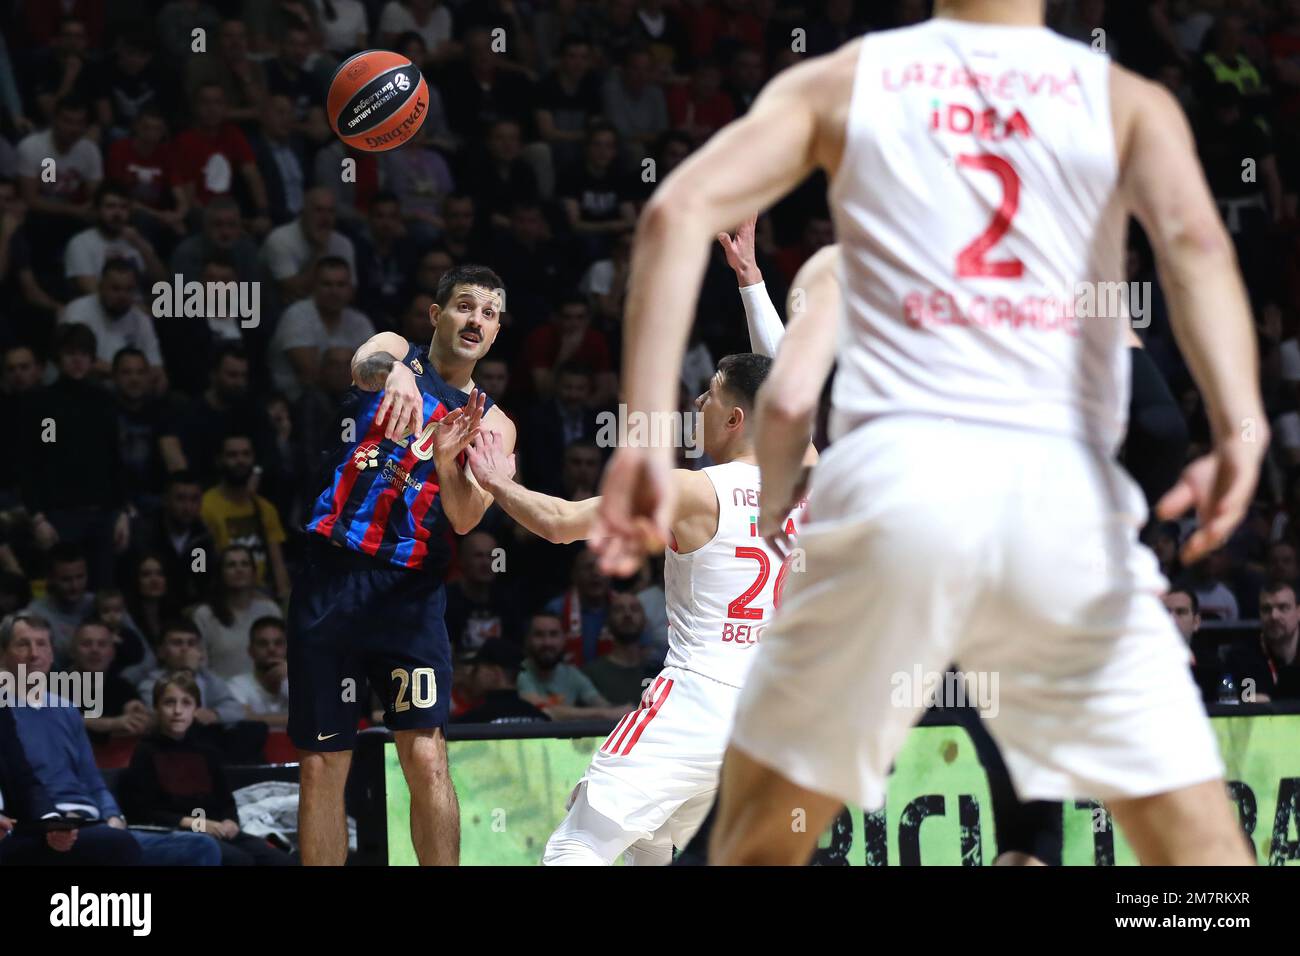 Belgrade, Serbia, 30 December 2022. Nicolas Laprovittola of FC Barcelona in action during the 2022/2023 Turkish Airlines EuroLeague match between Crvena Zvezda mts Belgrade and FC Barcelona at Stark Arena in Belgrade, Serbia. December 30, 2022. Credit: Nikola Krstic/Alamy Stock Photo